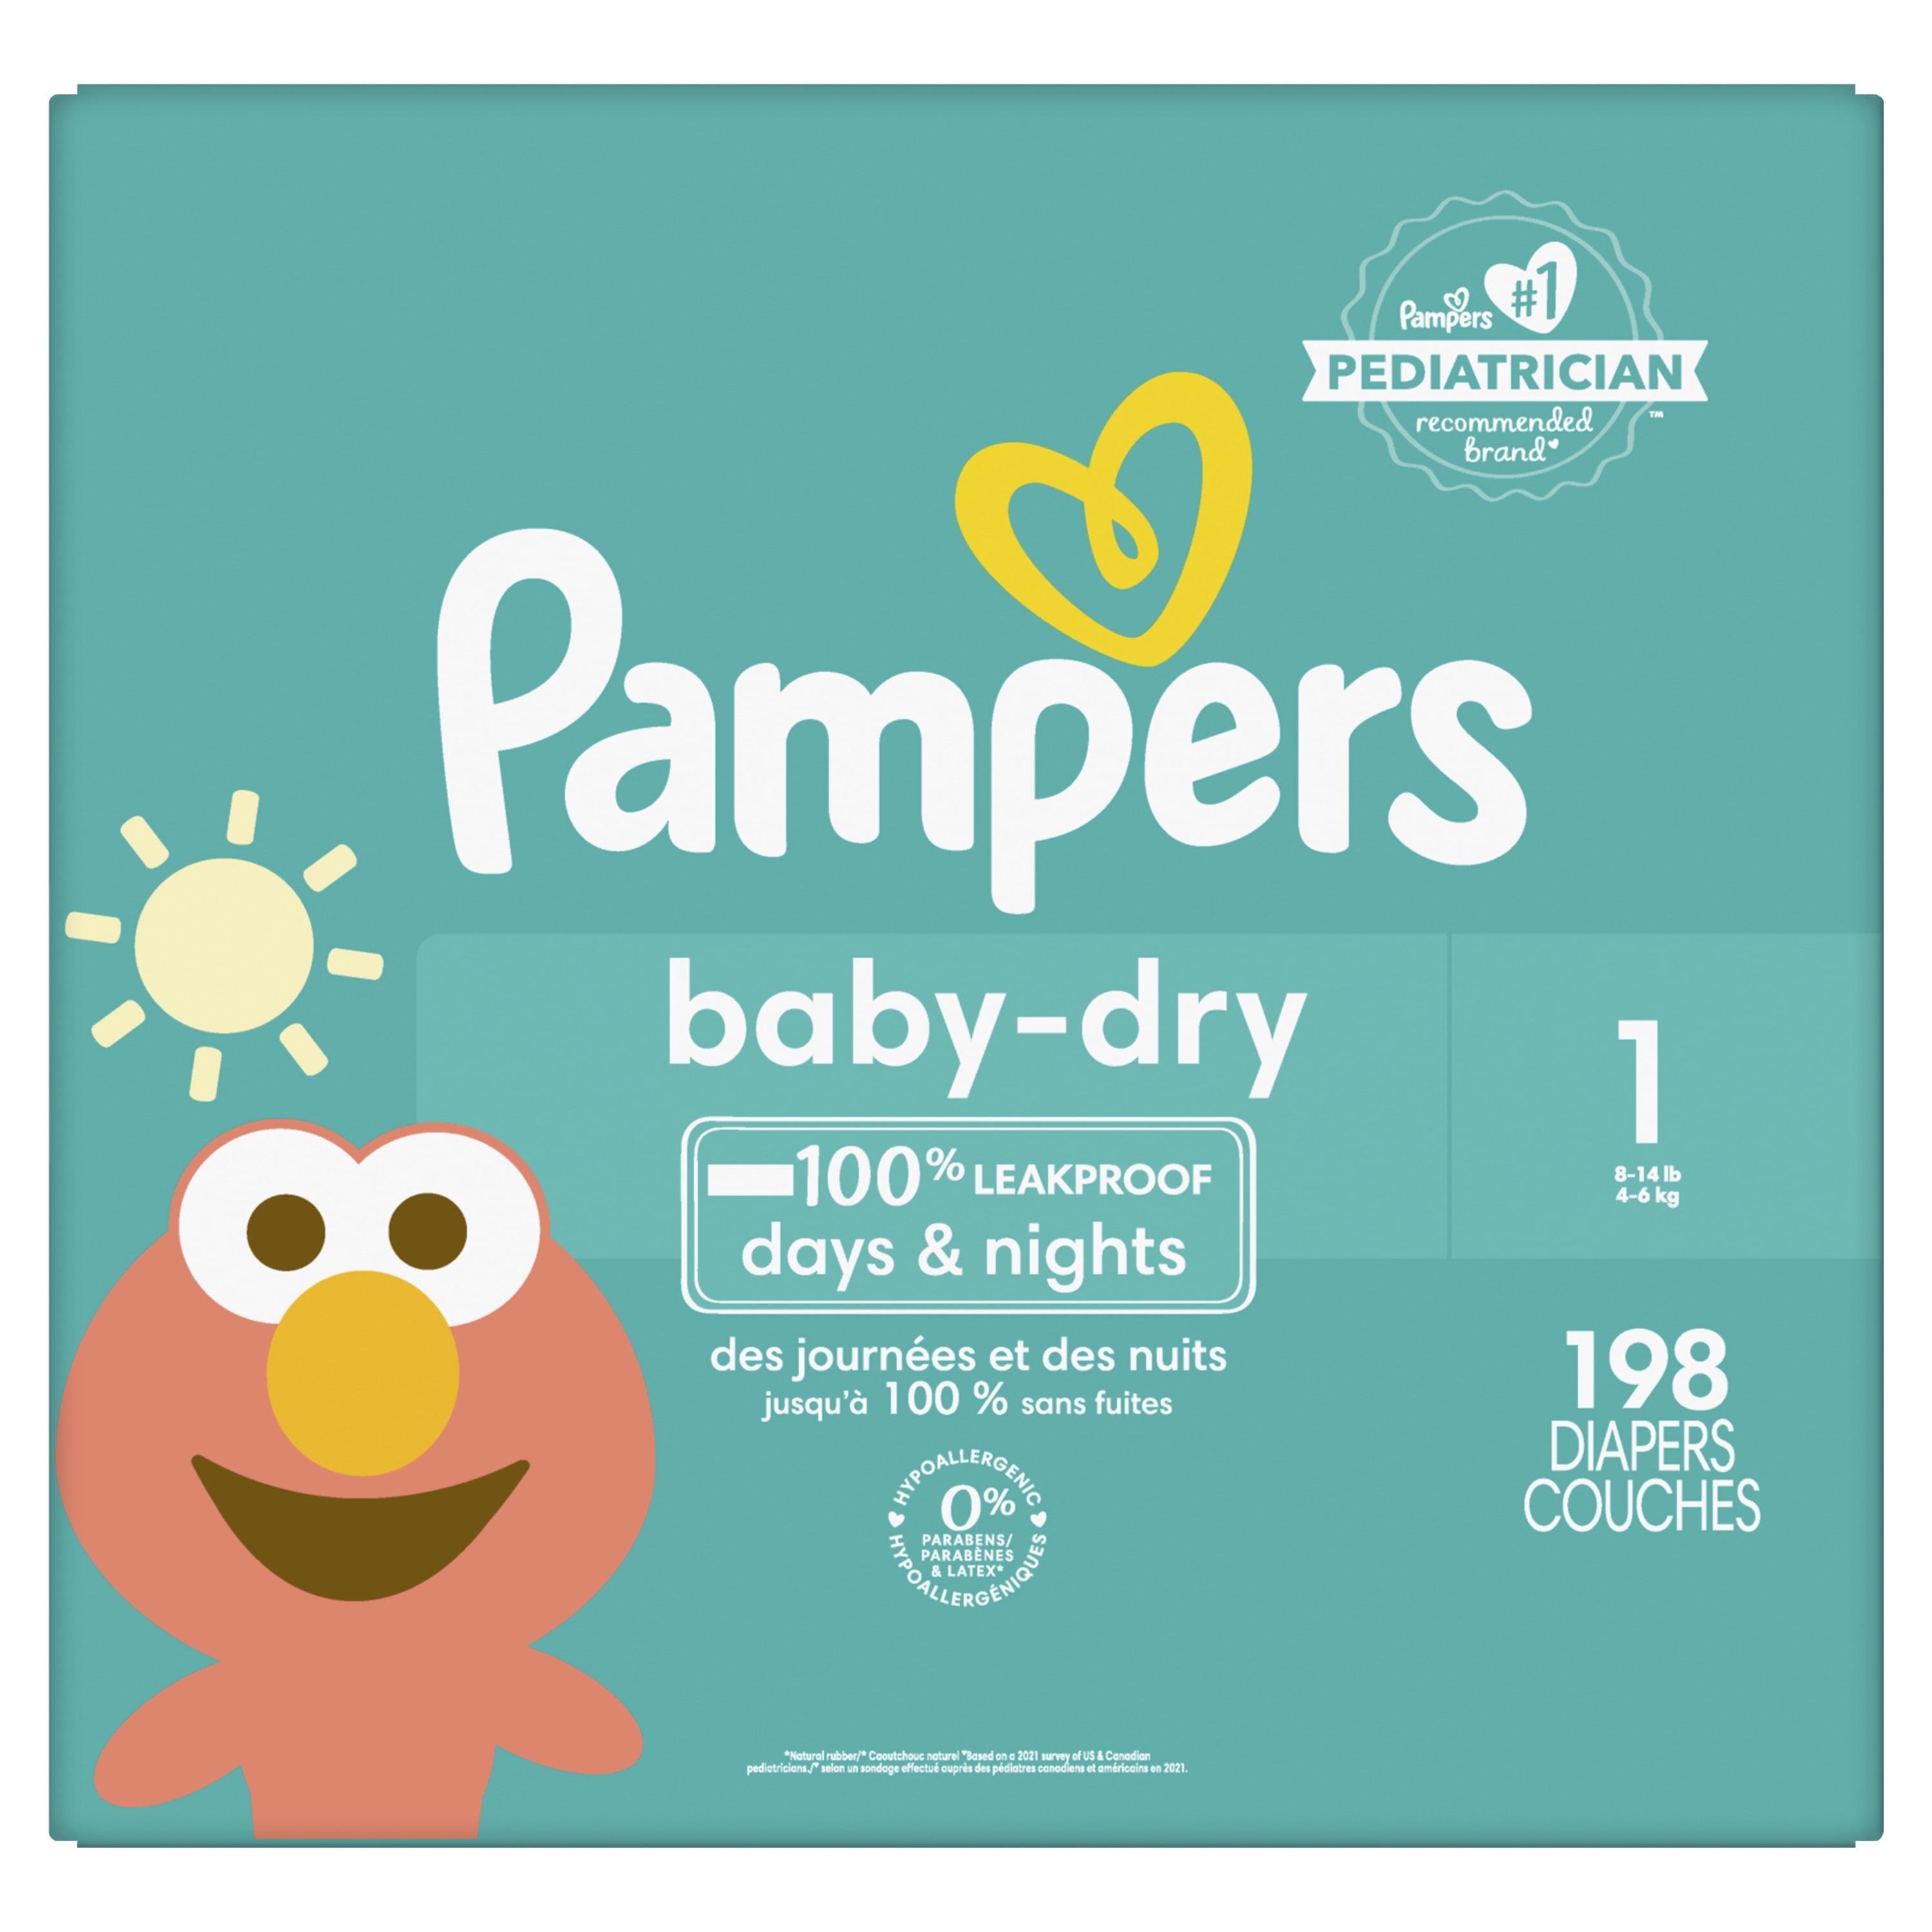 Couche Mega Pack pampers Baby-dry Nappy Pants Taille 4 de 84